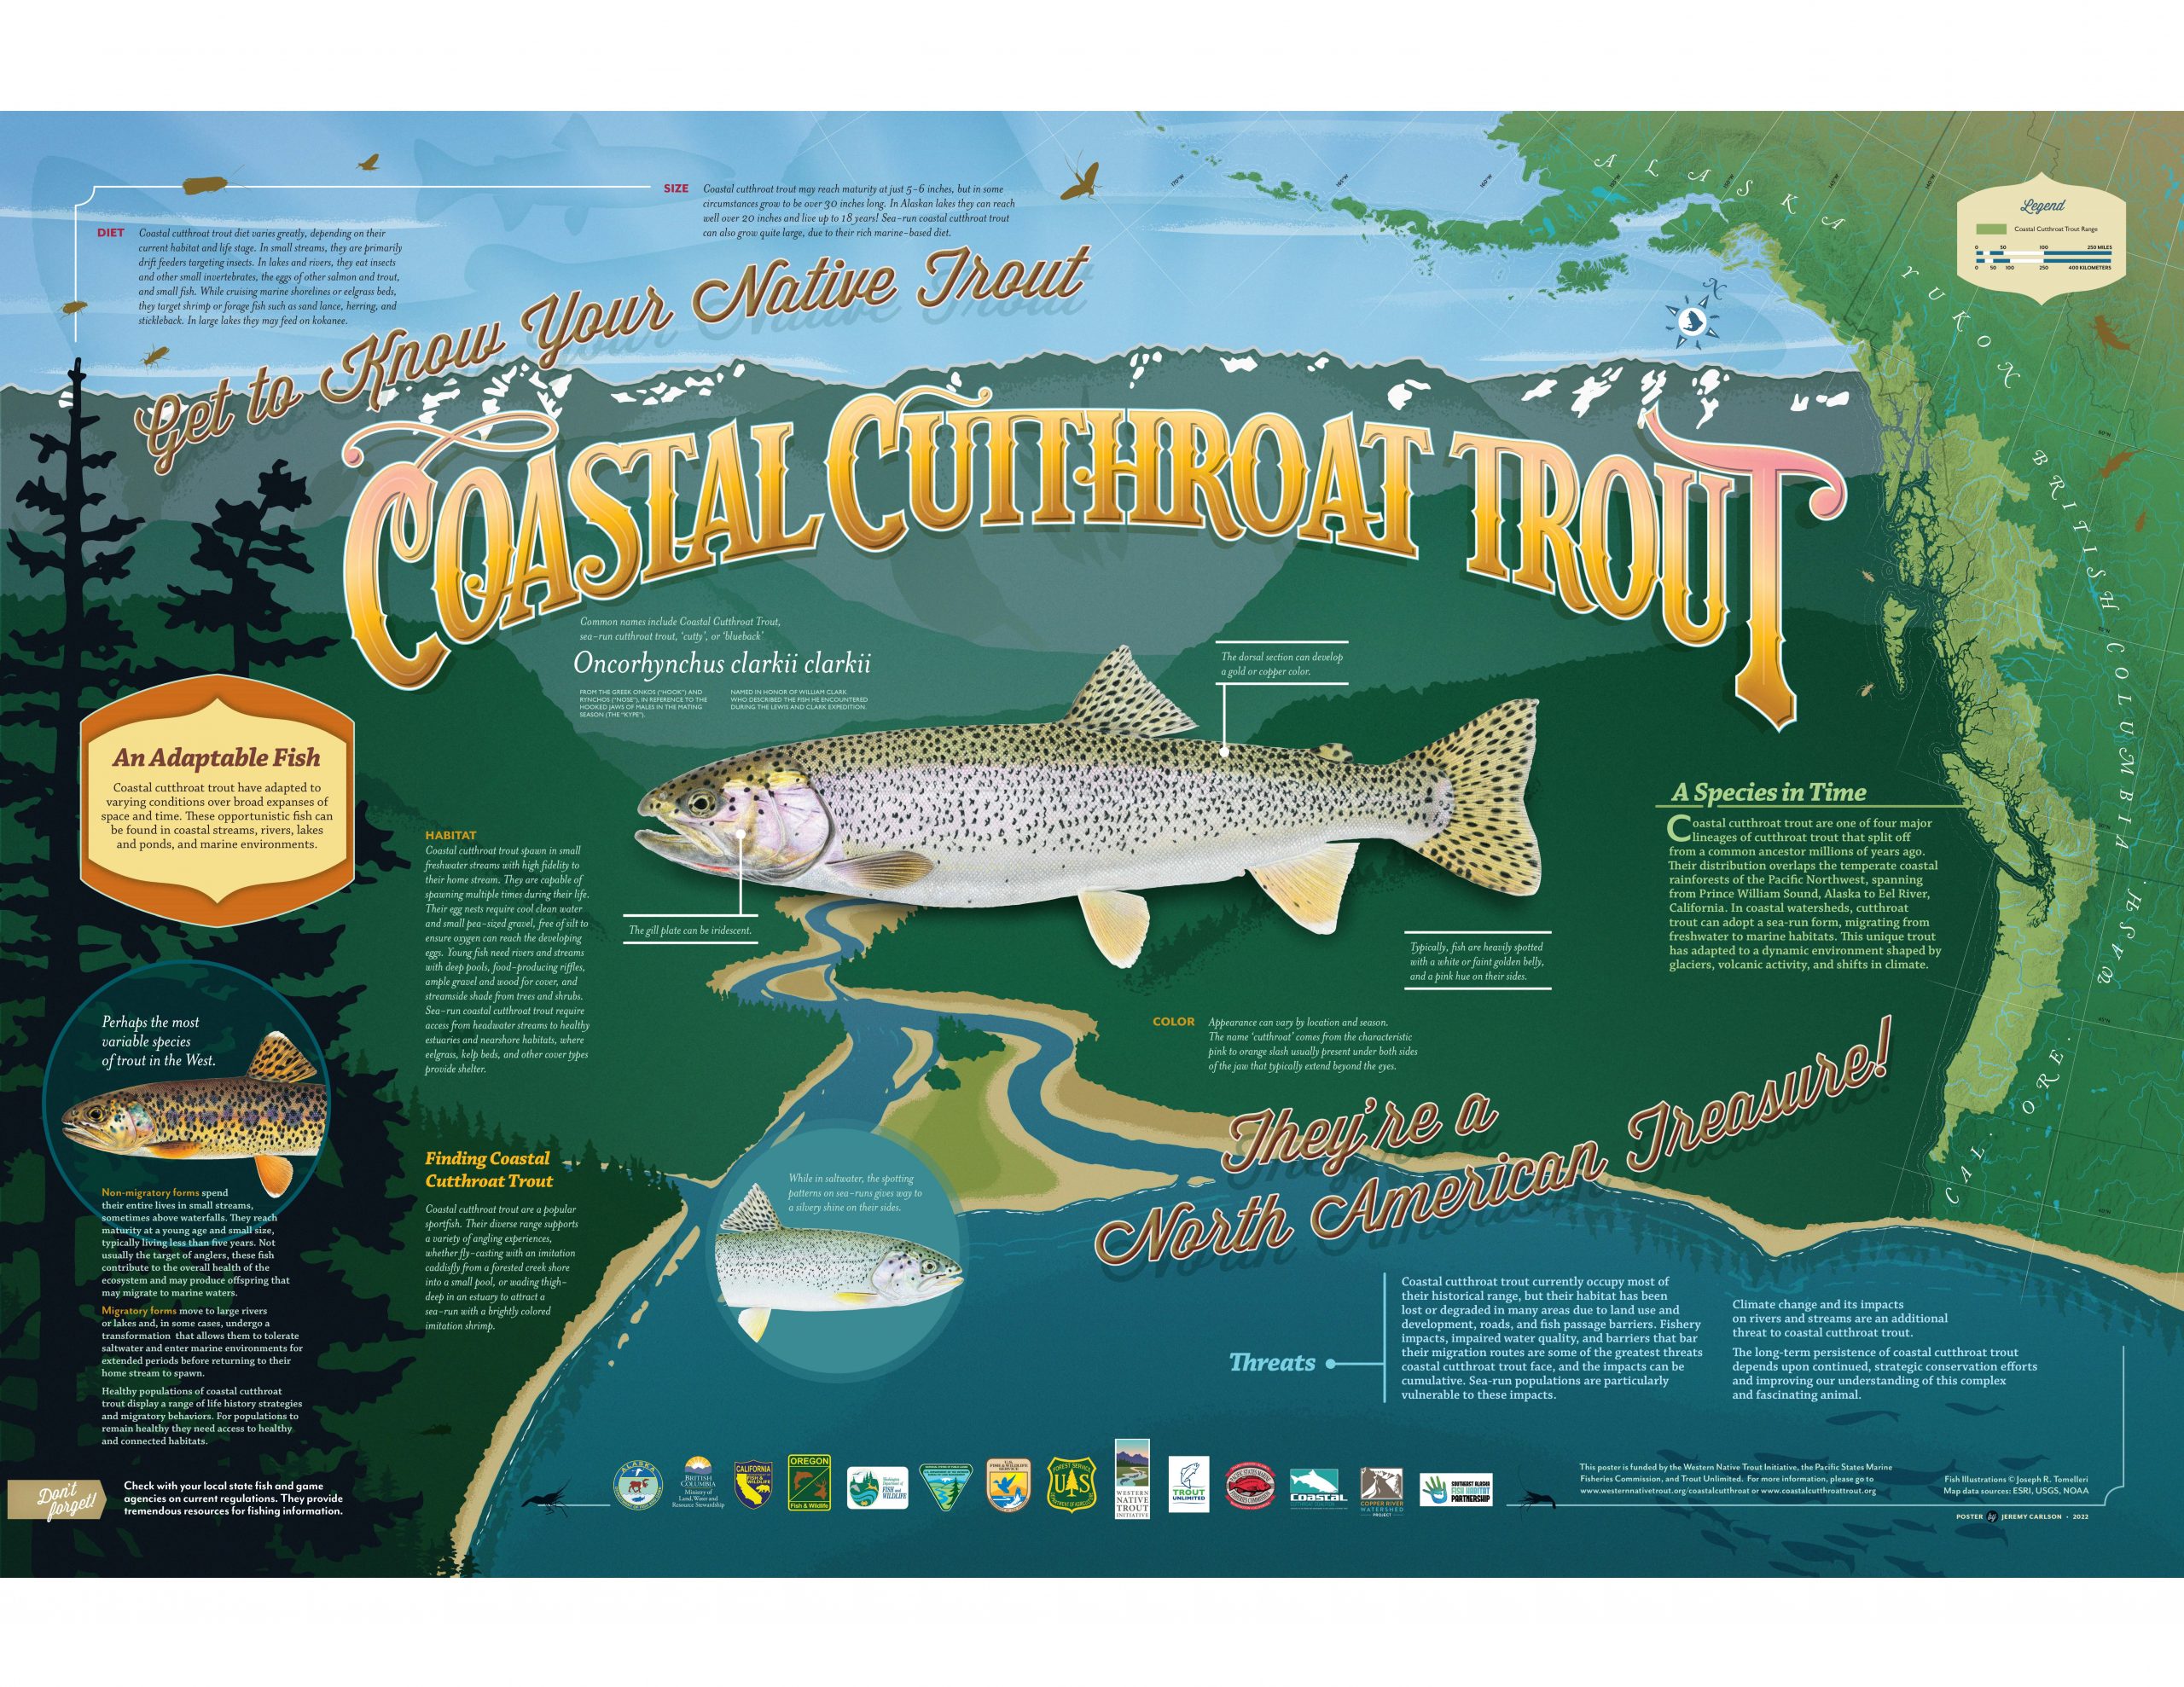 Poster showing a coastal cutthroat trout and facts about it.